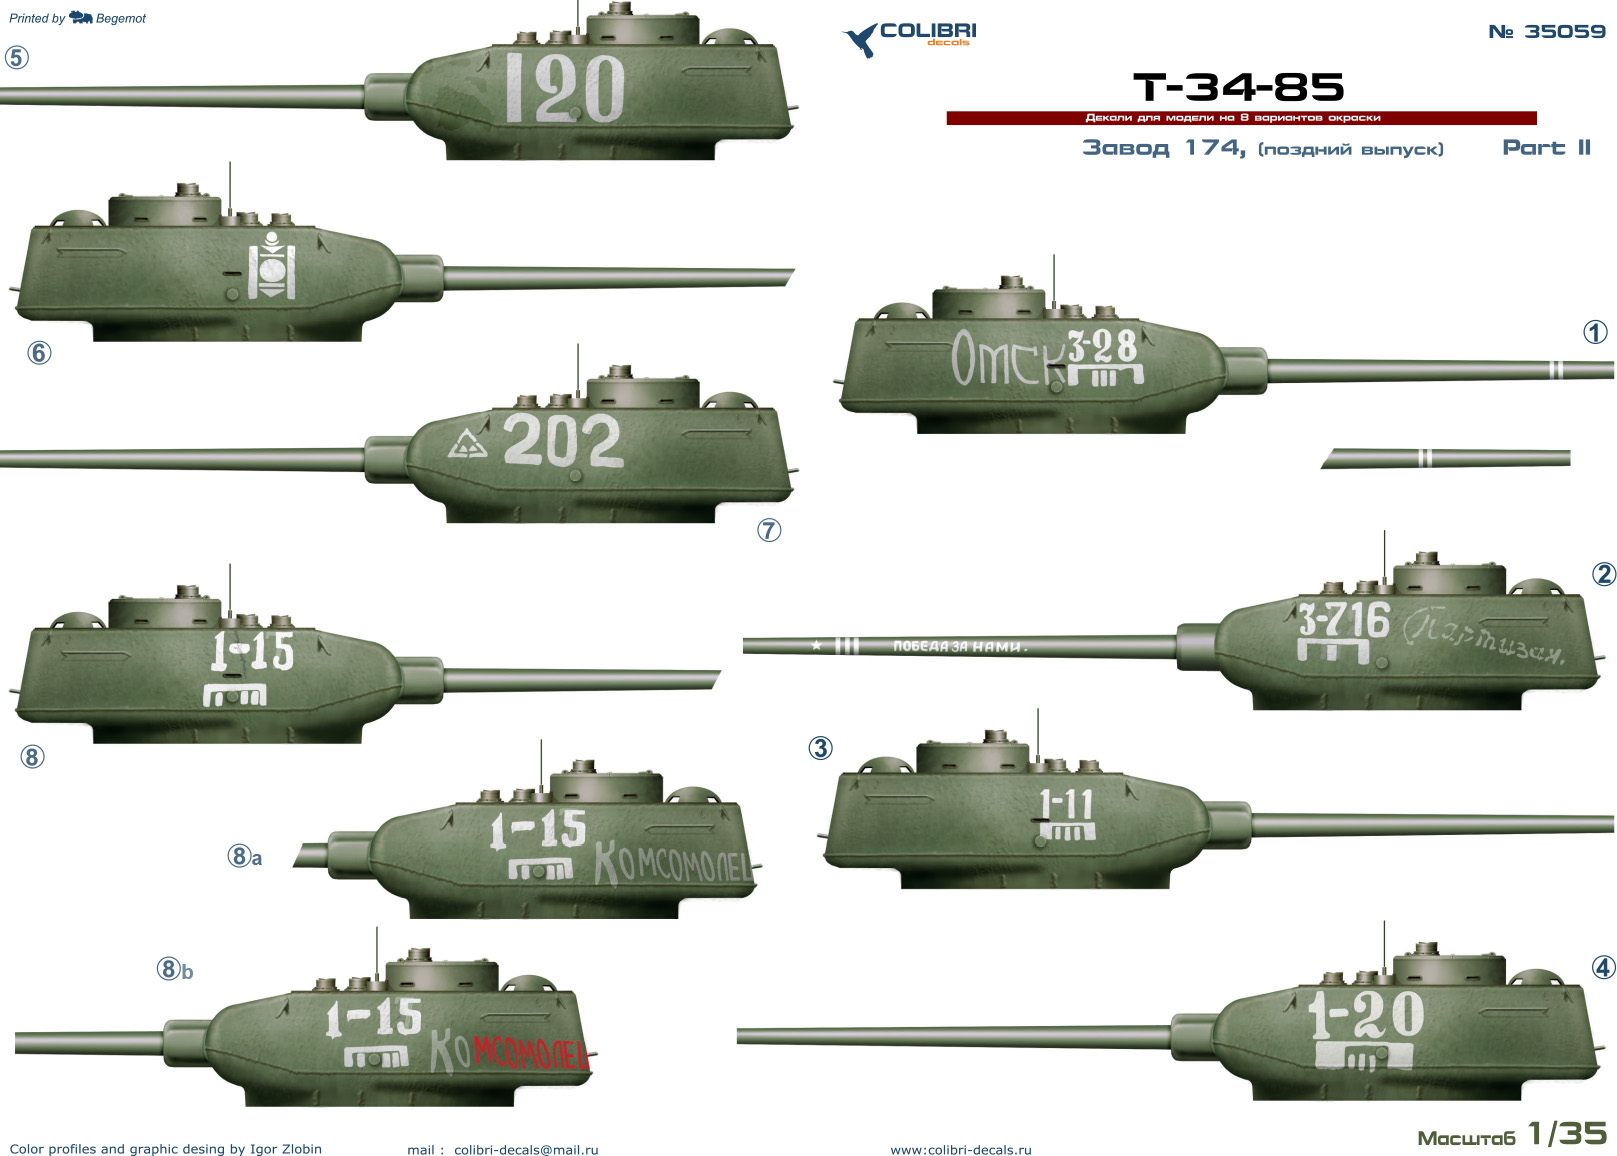 Decal 1/35 T-34-85 factory 174. Part II (Colibri Decals)